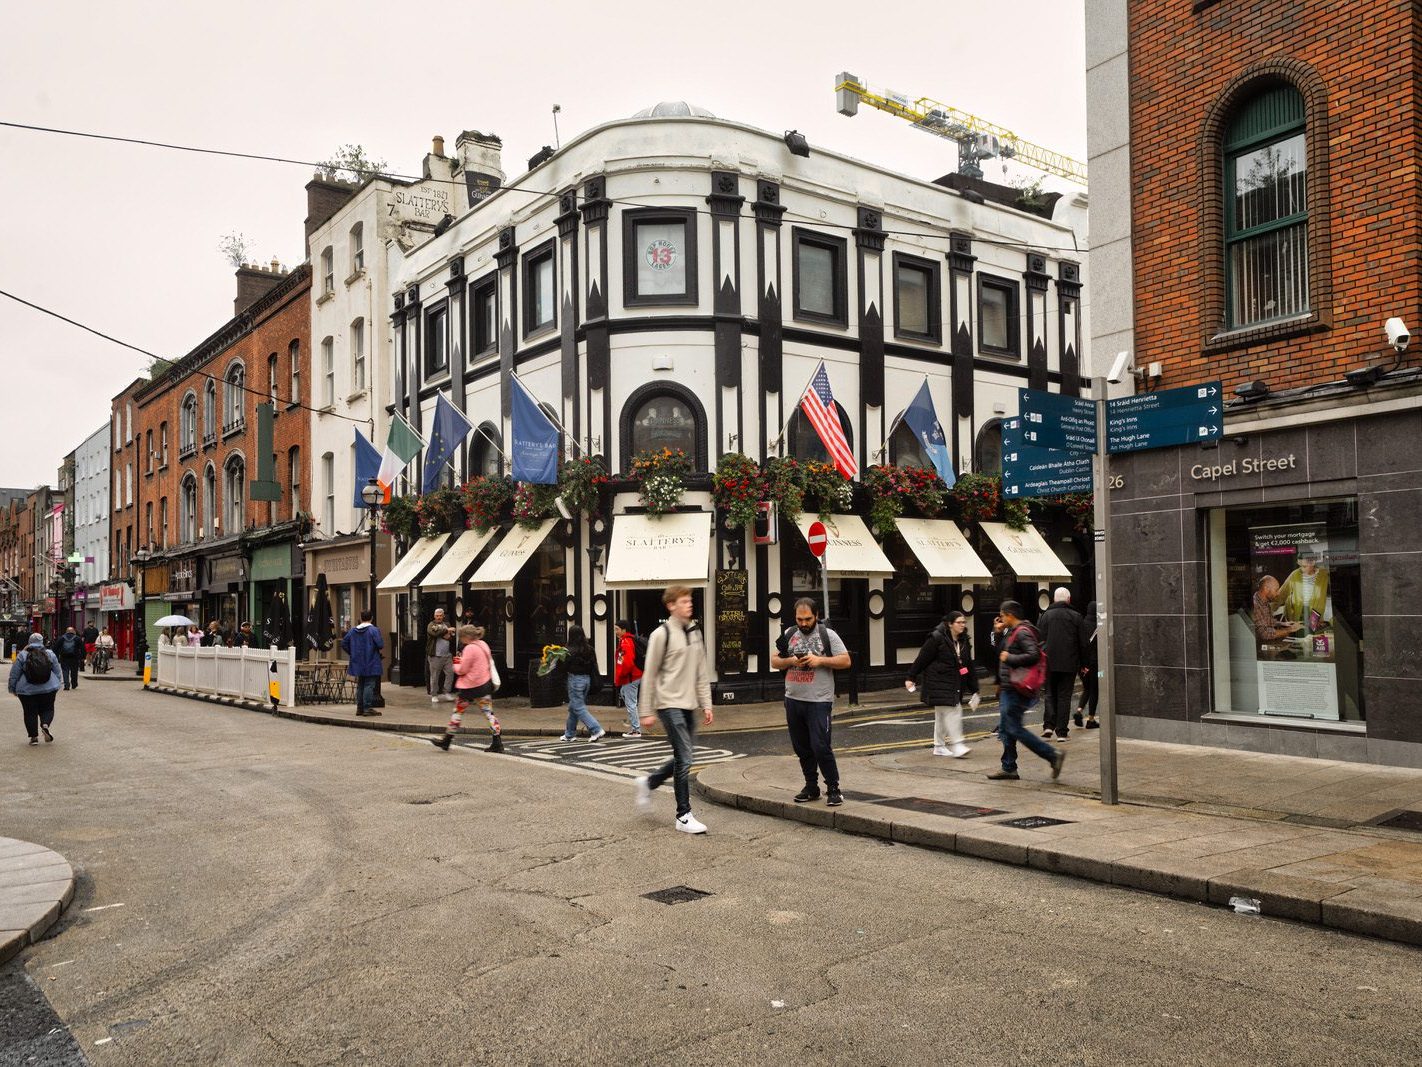 CAPEL STREET ON A DULL WET DAY [INTERIM CAPEL STREET IMPROVEMENT WORKS ARE NOW ONGOING] 016